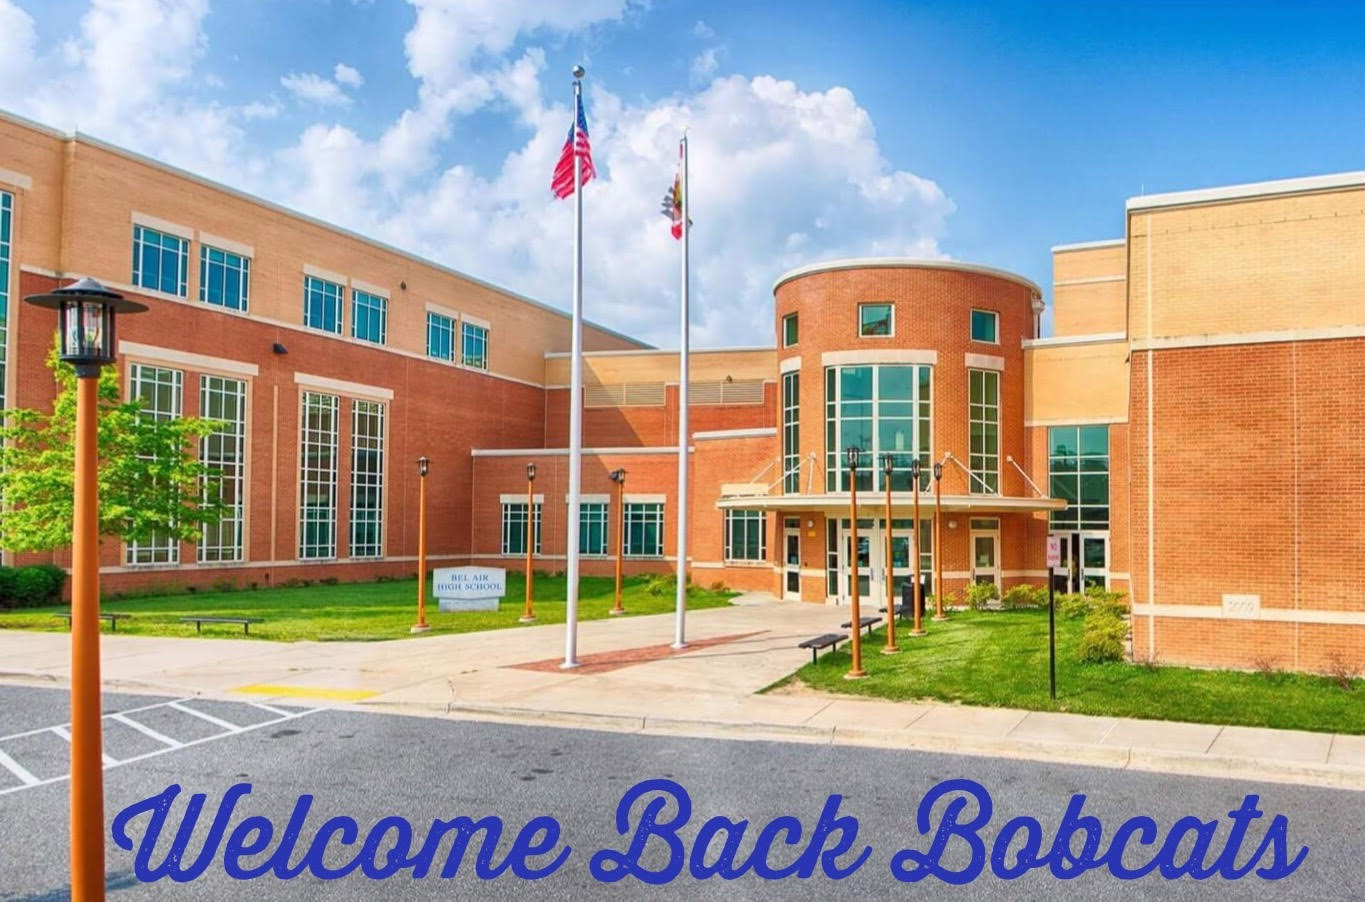 Welcome Back Bobcats!